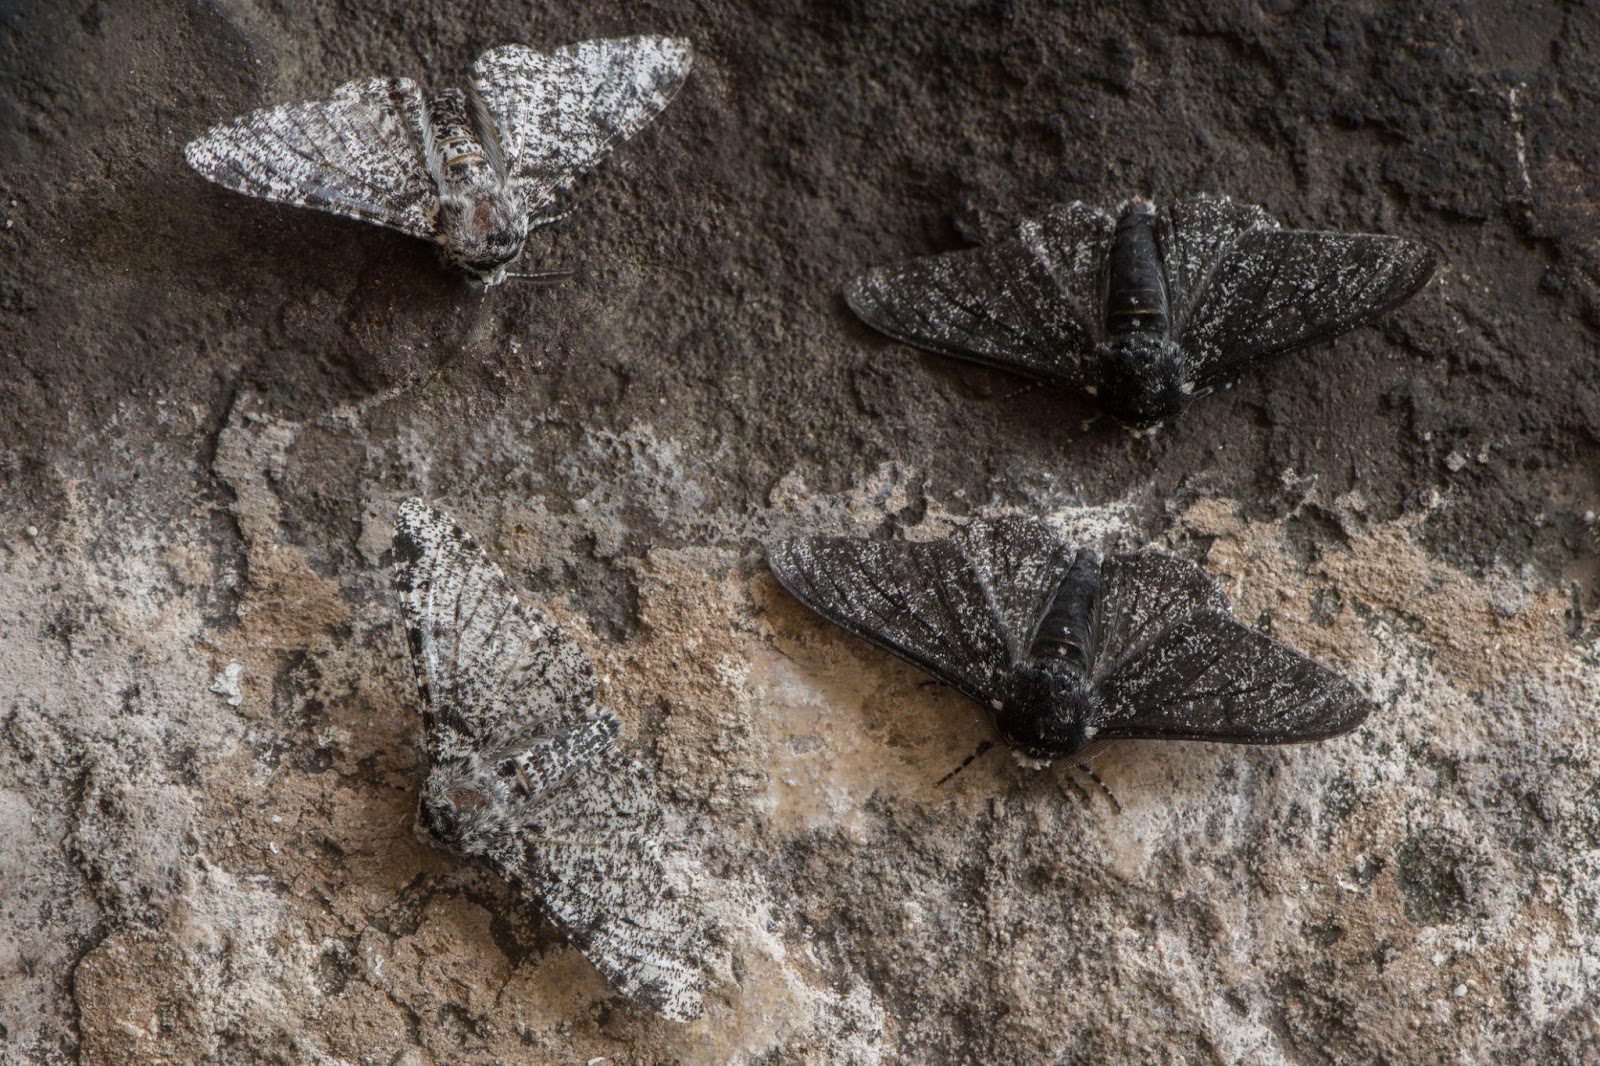 Black or white peppered moths can camouflage more effectively depending on the surface. 